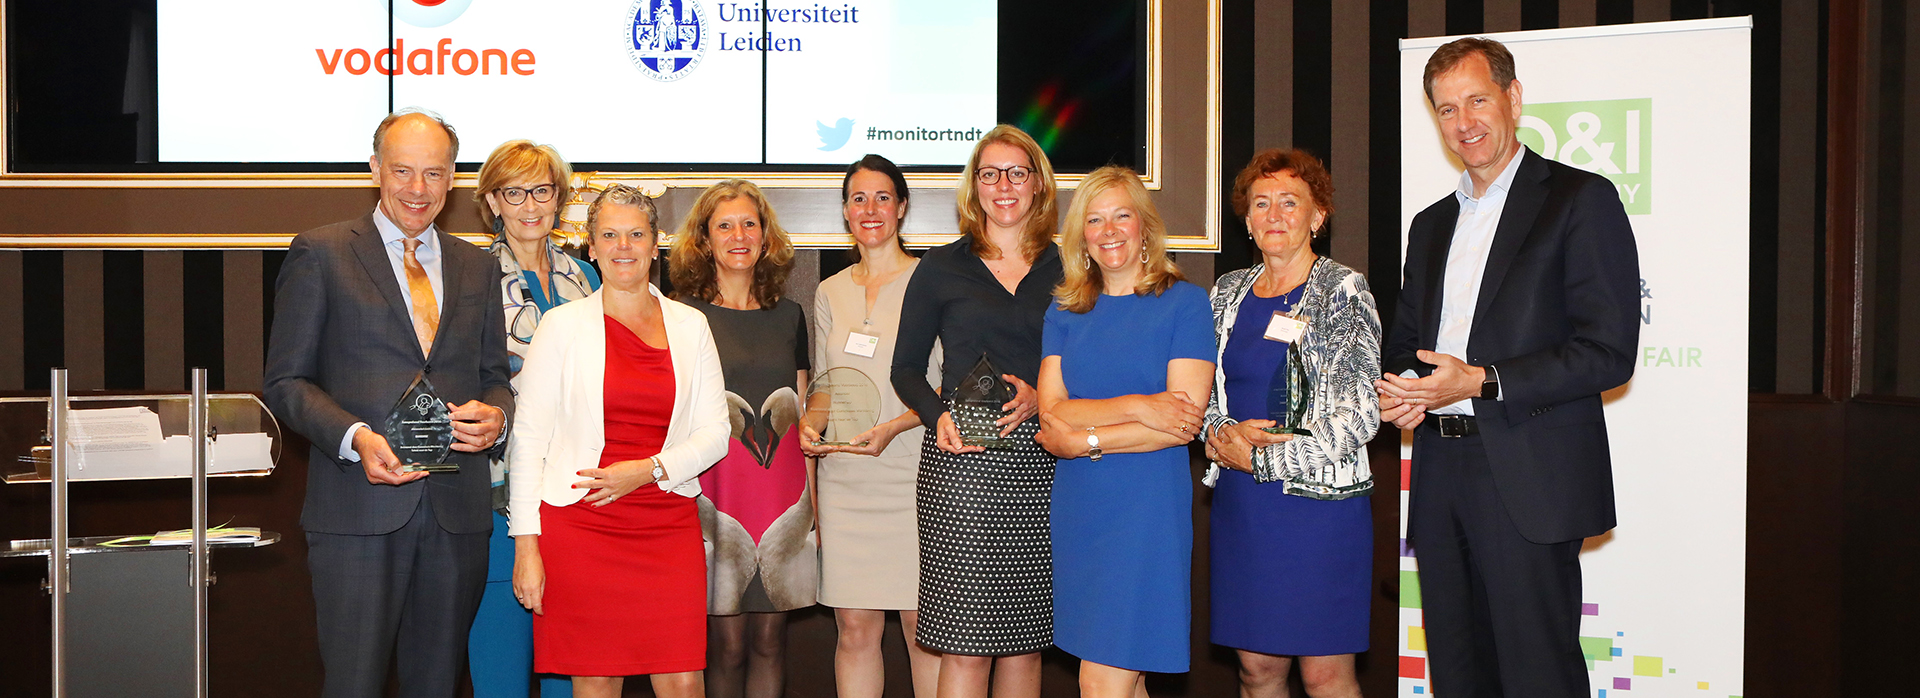 Carel Stolker was presented with a 'Diamond' award for Leiden University's diversity policy.